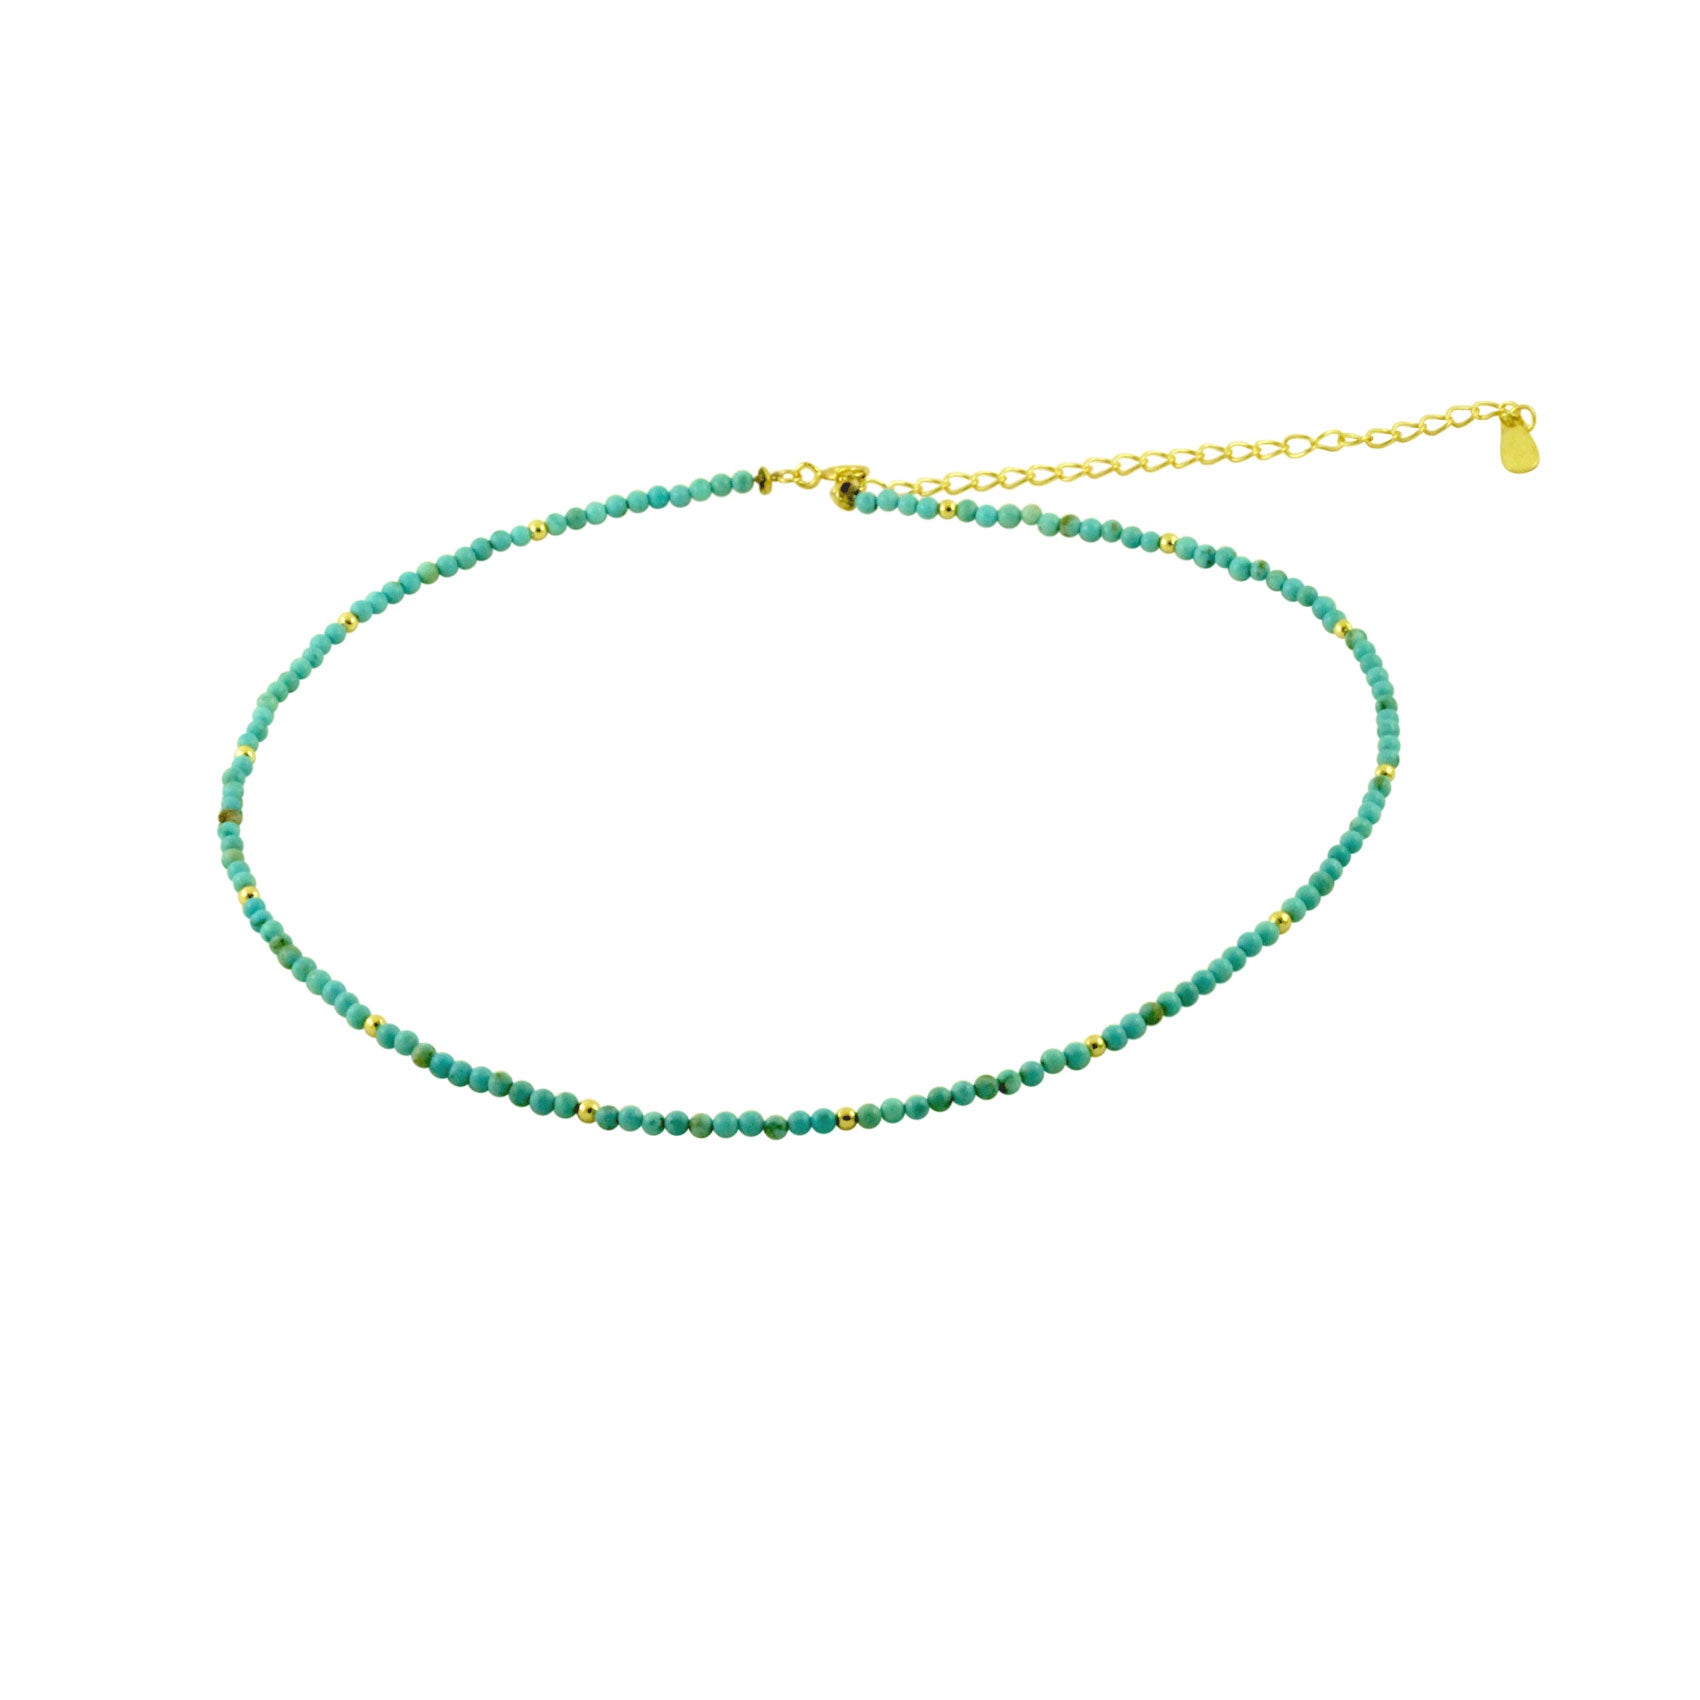 Turquoise & Golden Bead Choker Necklace